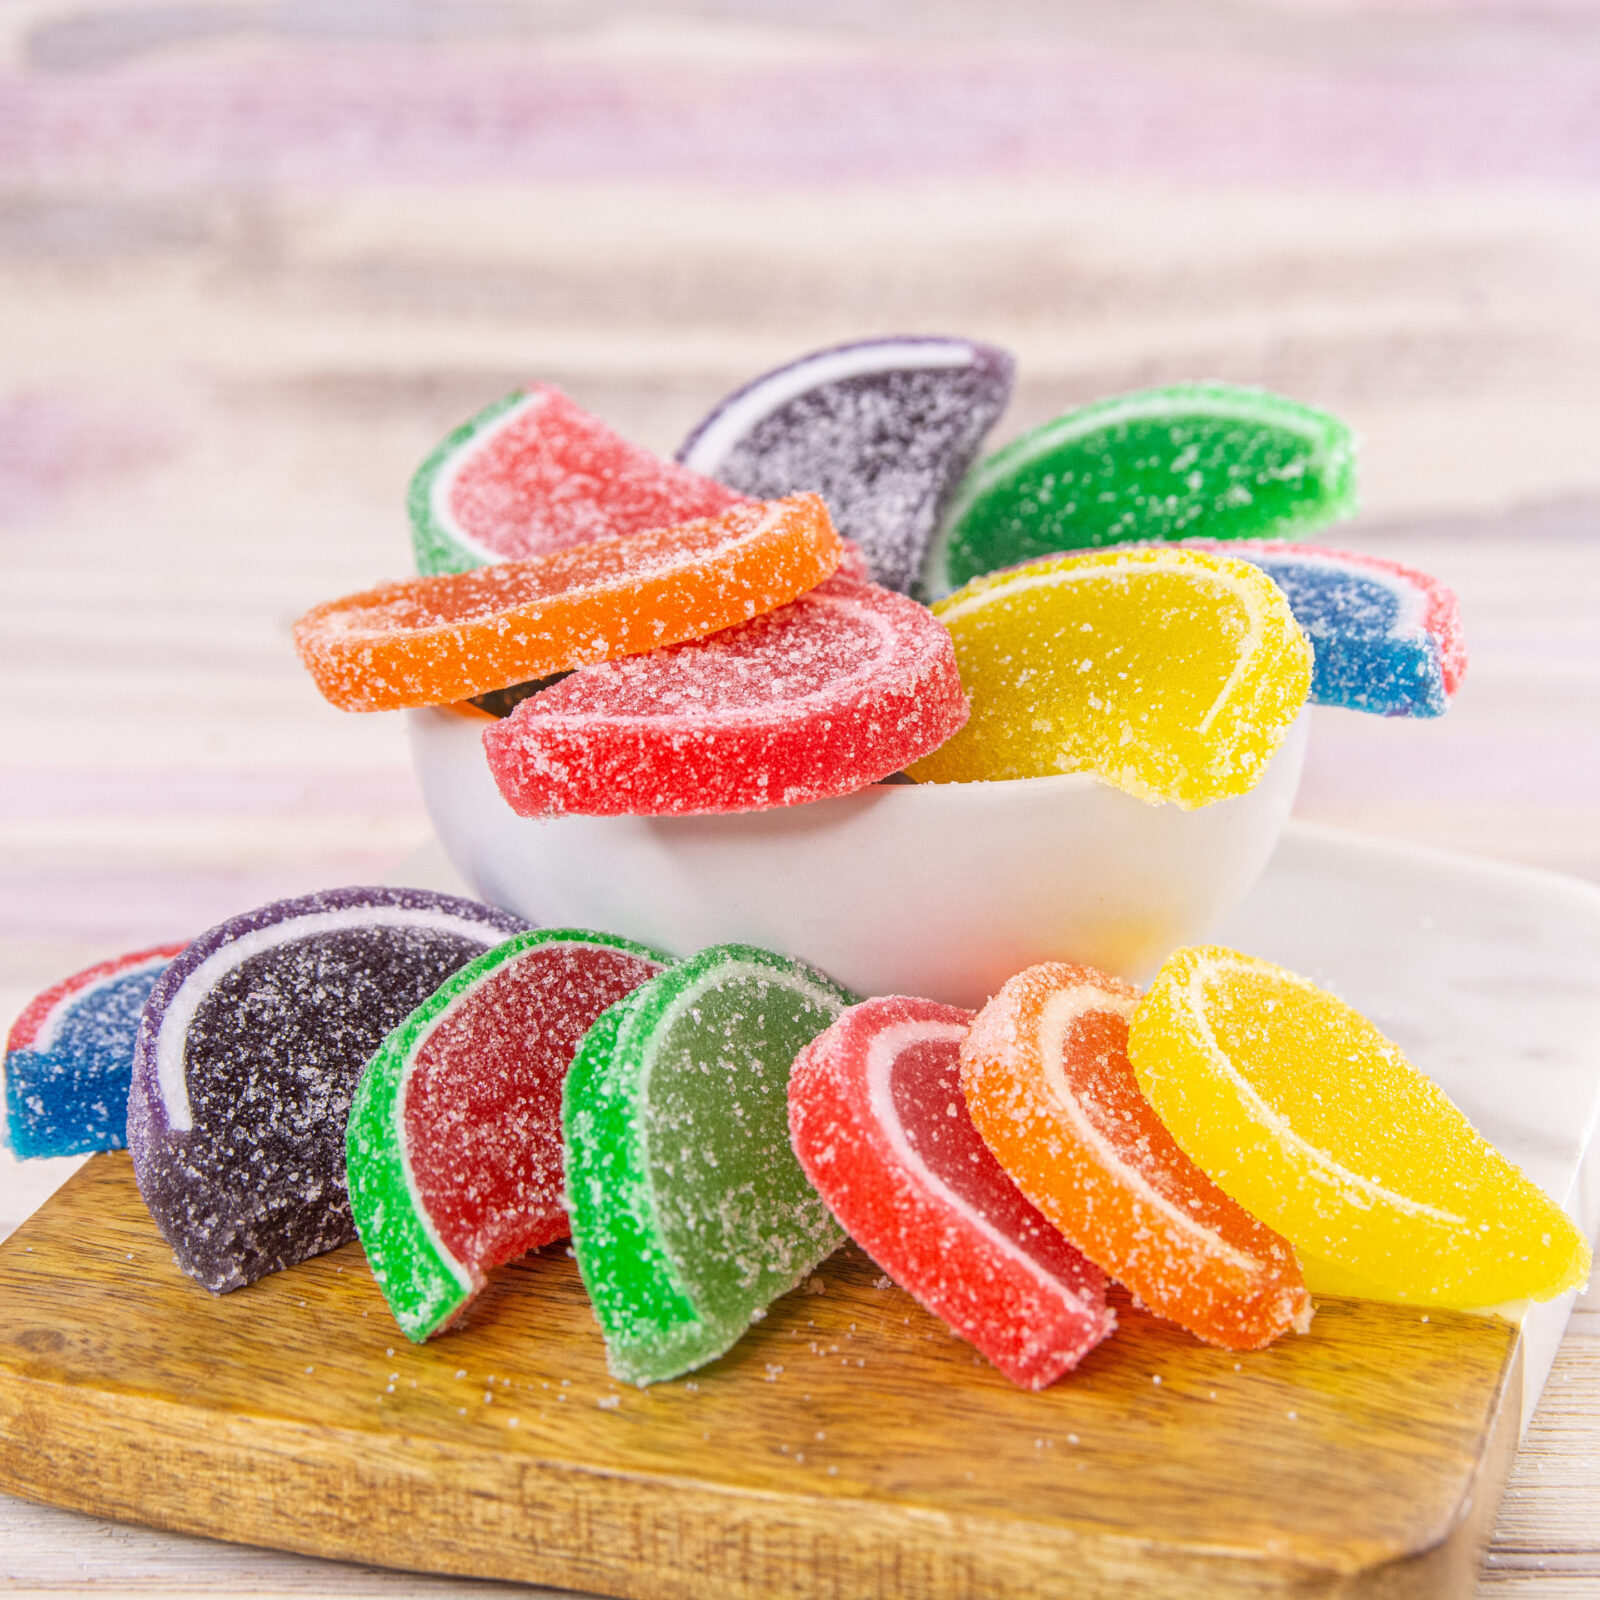 Assorted Flavored Fruit Slice Candies 